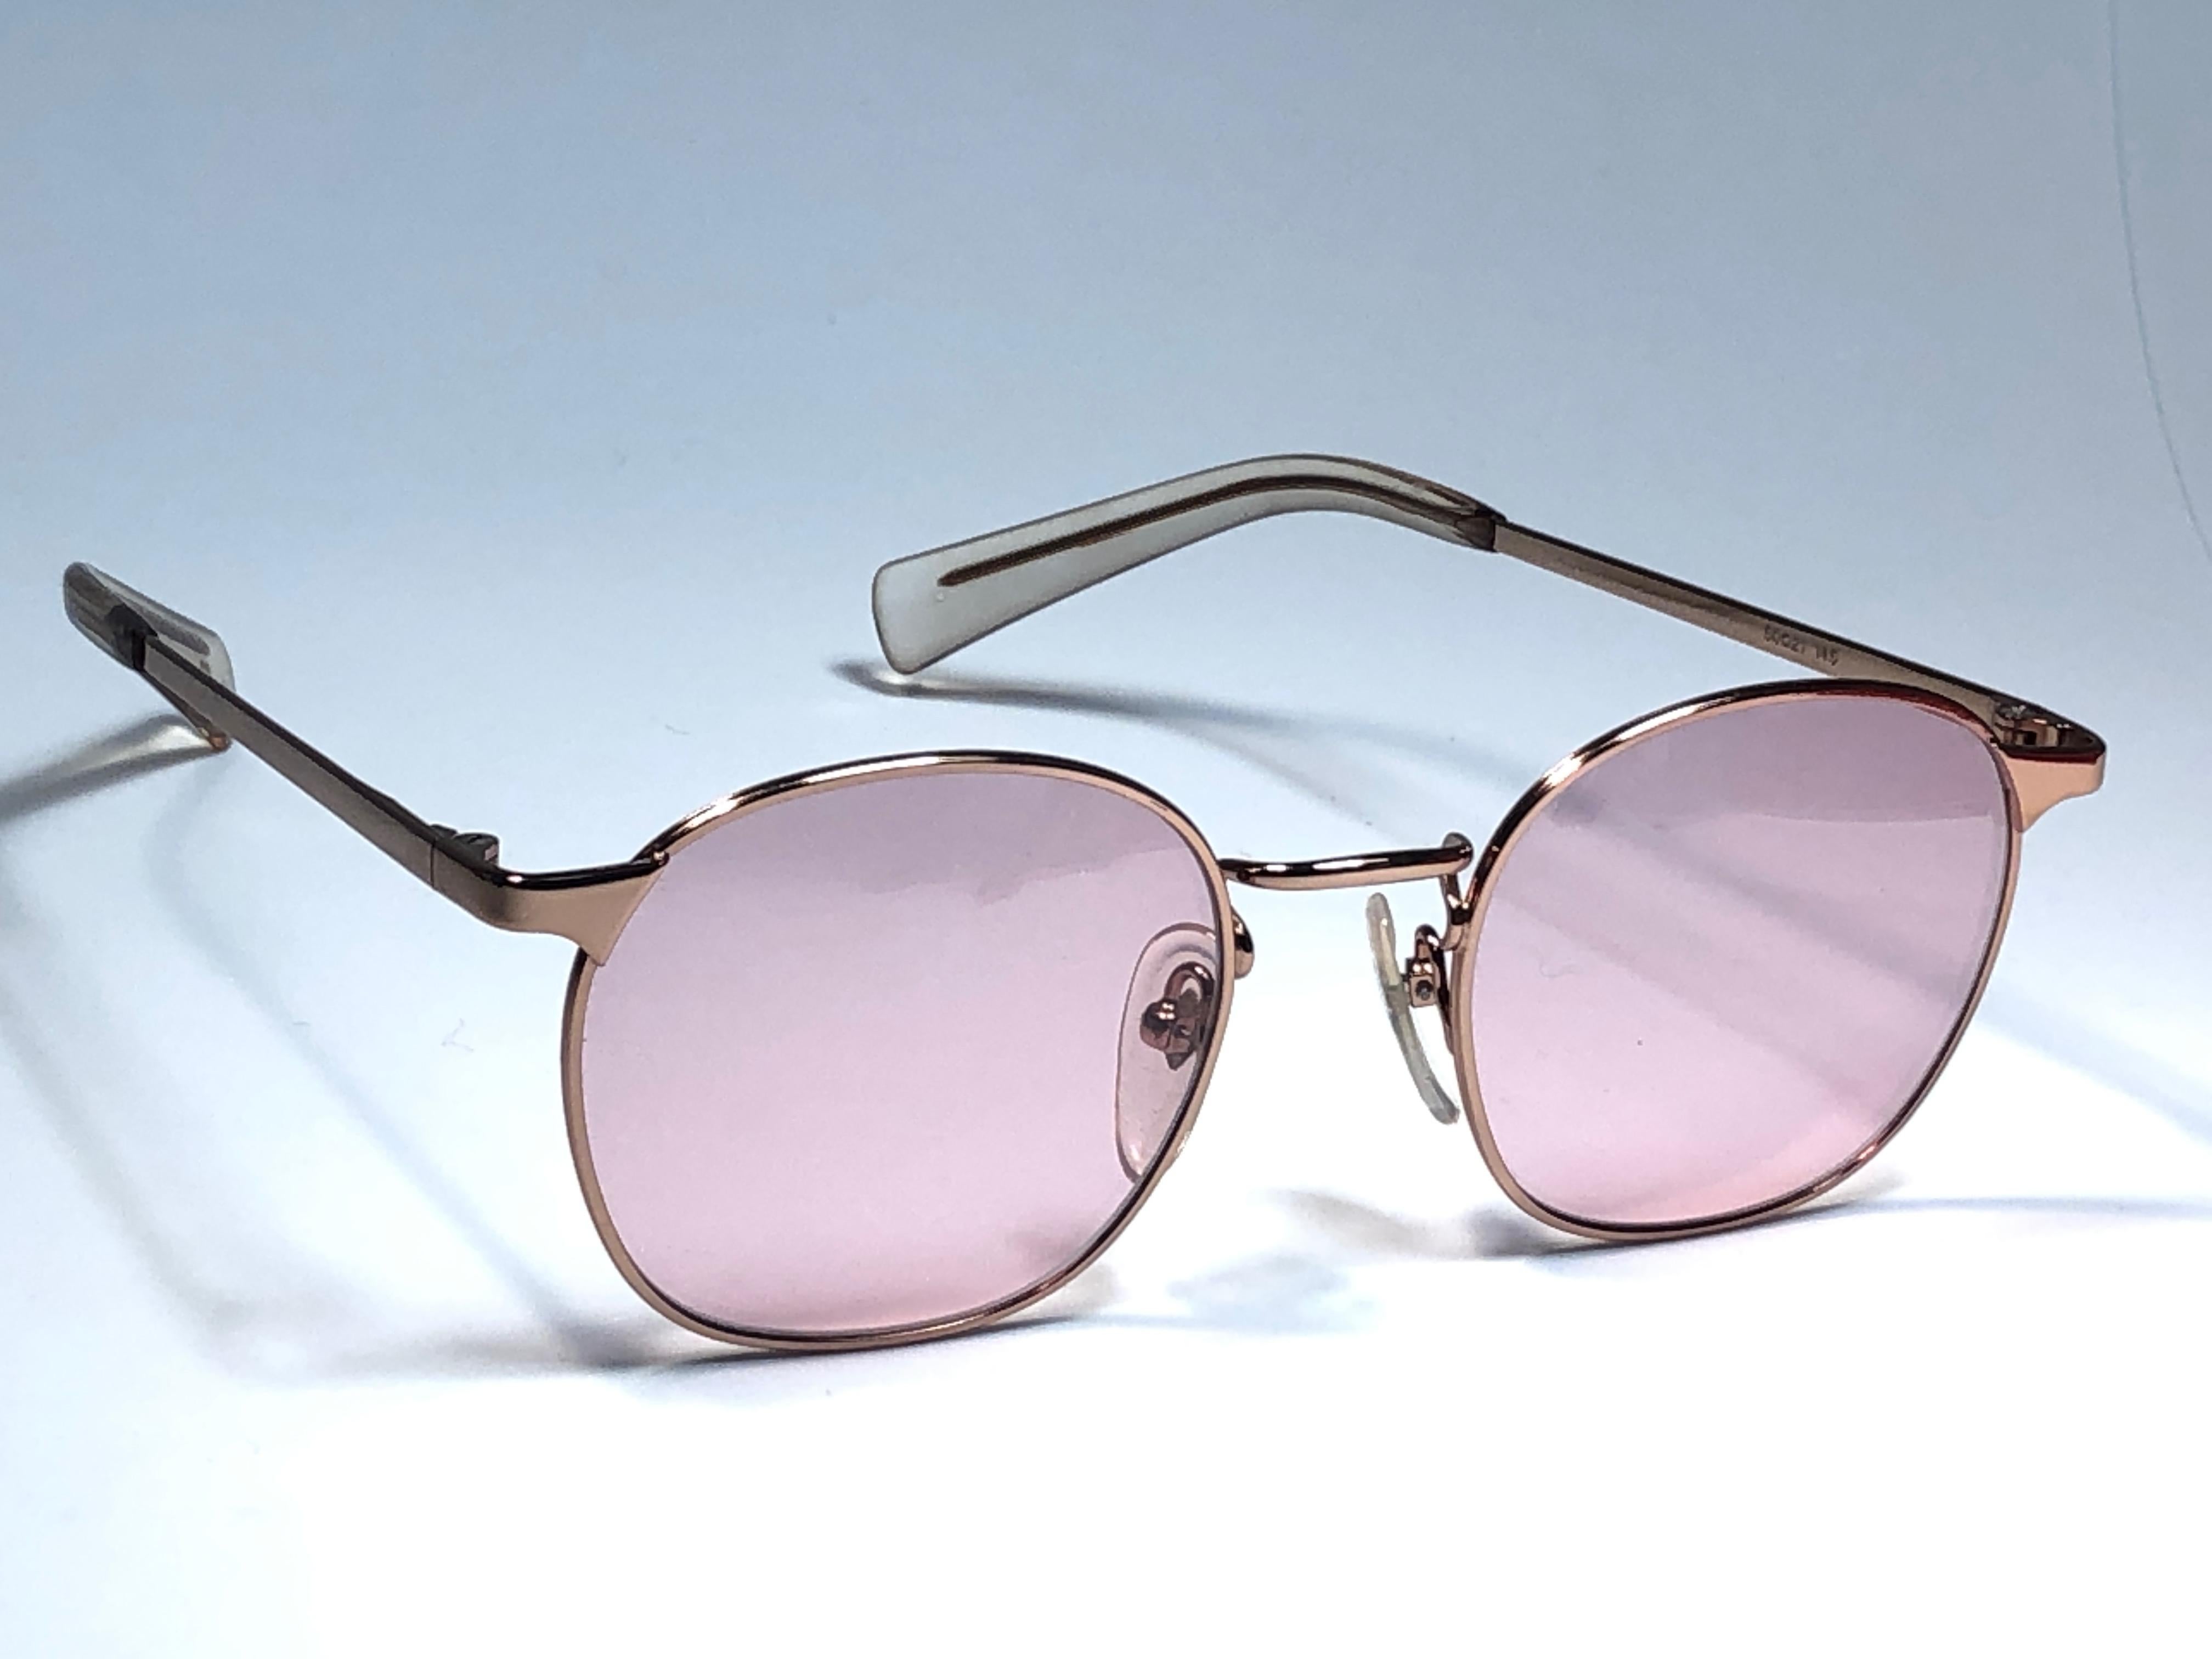 New Jean Paul Gaultier medium oval gold frame sunglasses.
Light rose lenses that complete a ready to wear JPG look.

Amazing design with strong yet intricate details.
Design and produced in the 1990's.
New, never worn or displayed.
This item may